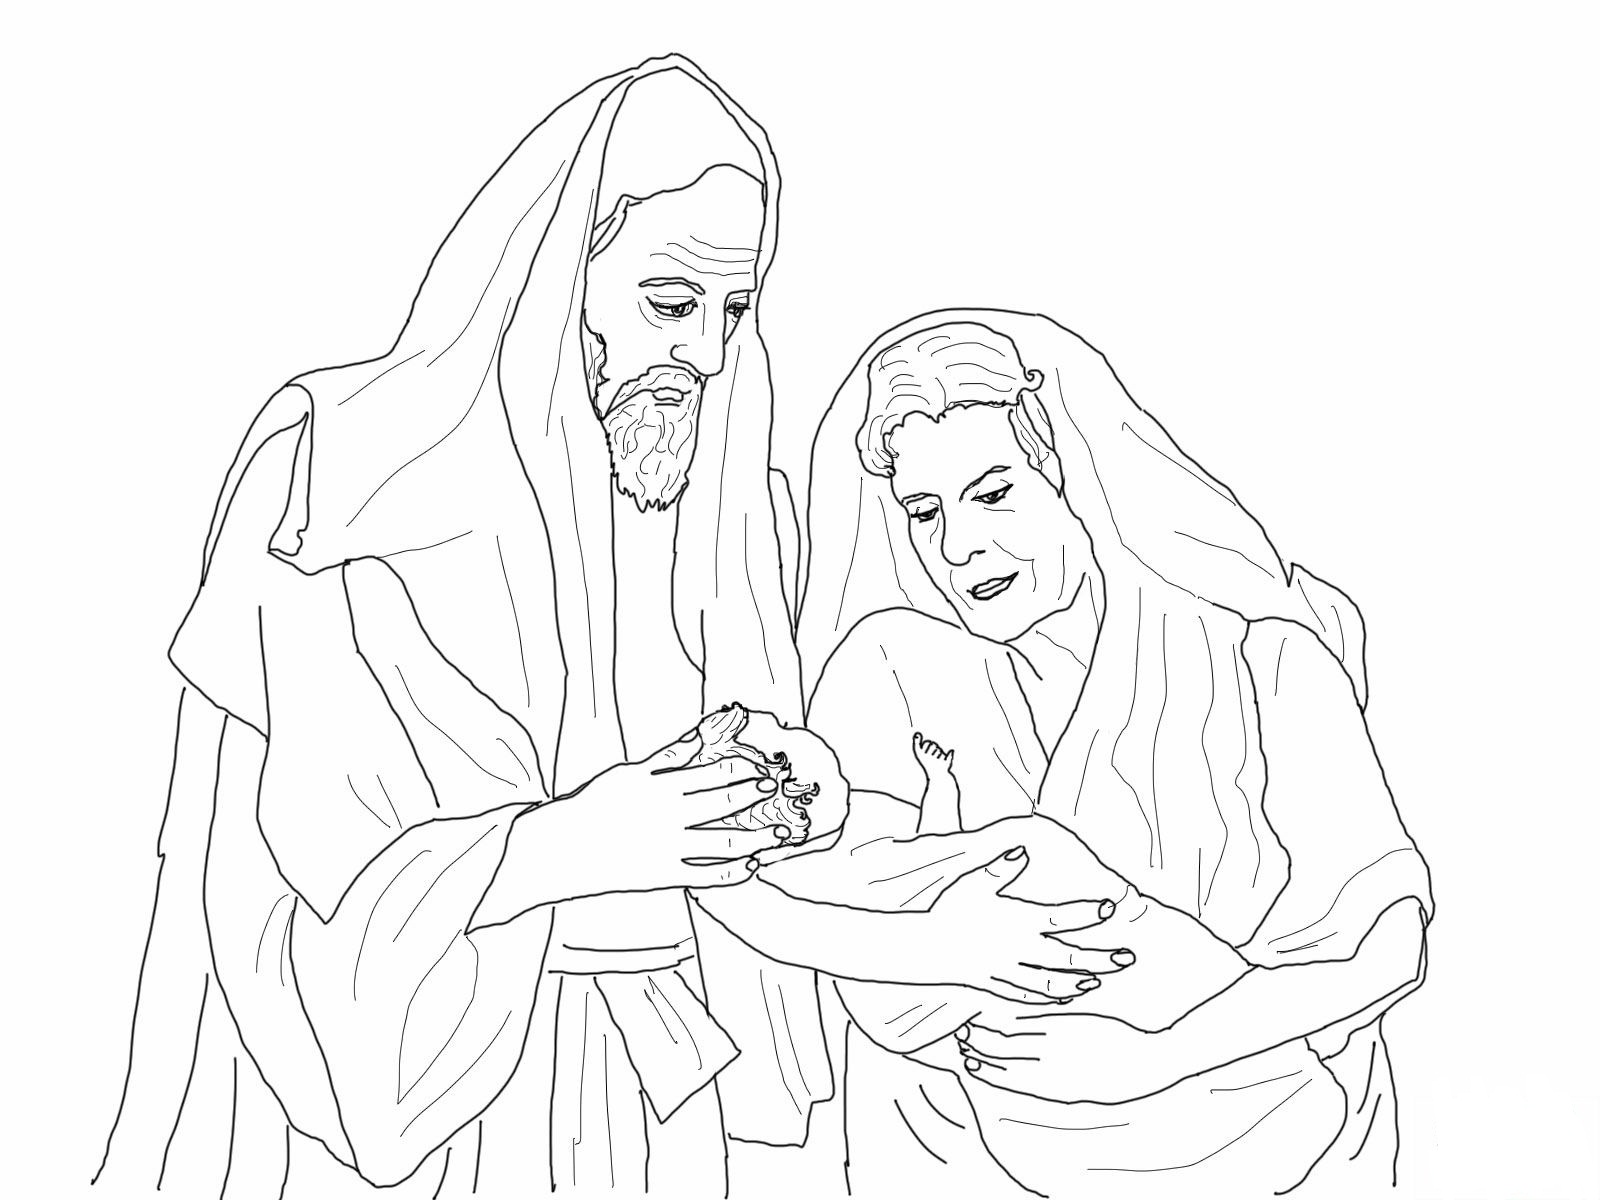 abram and sarai coloring page